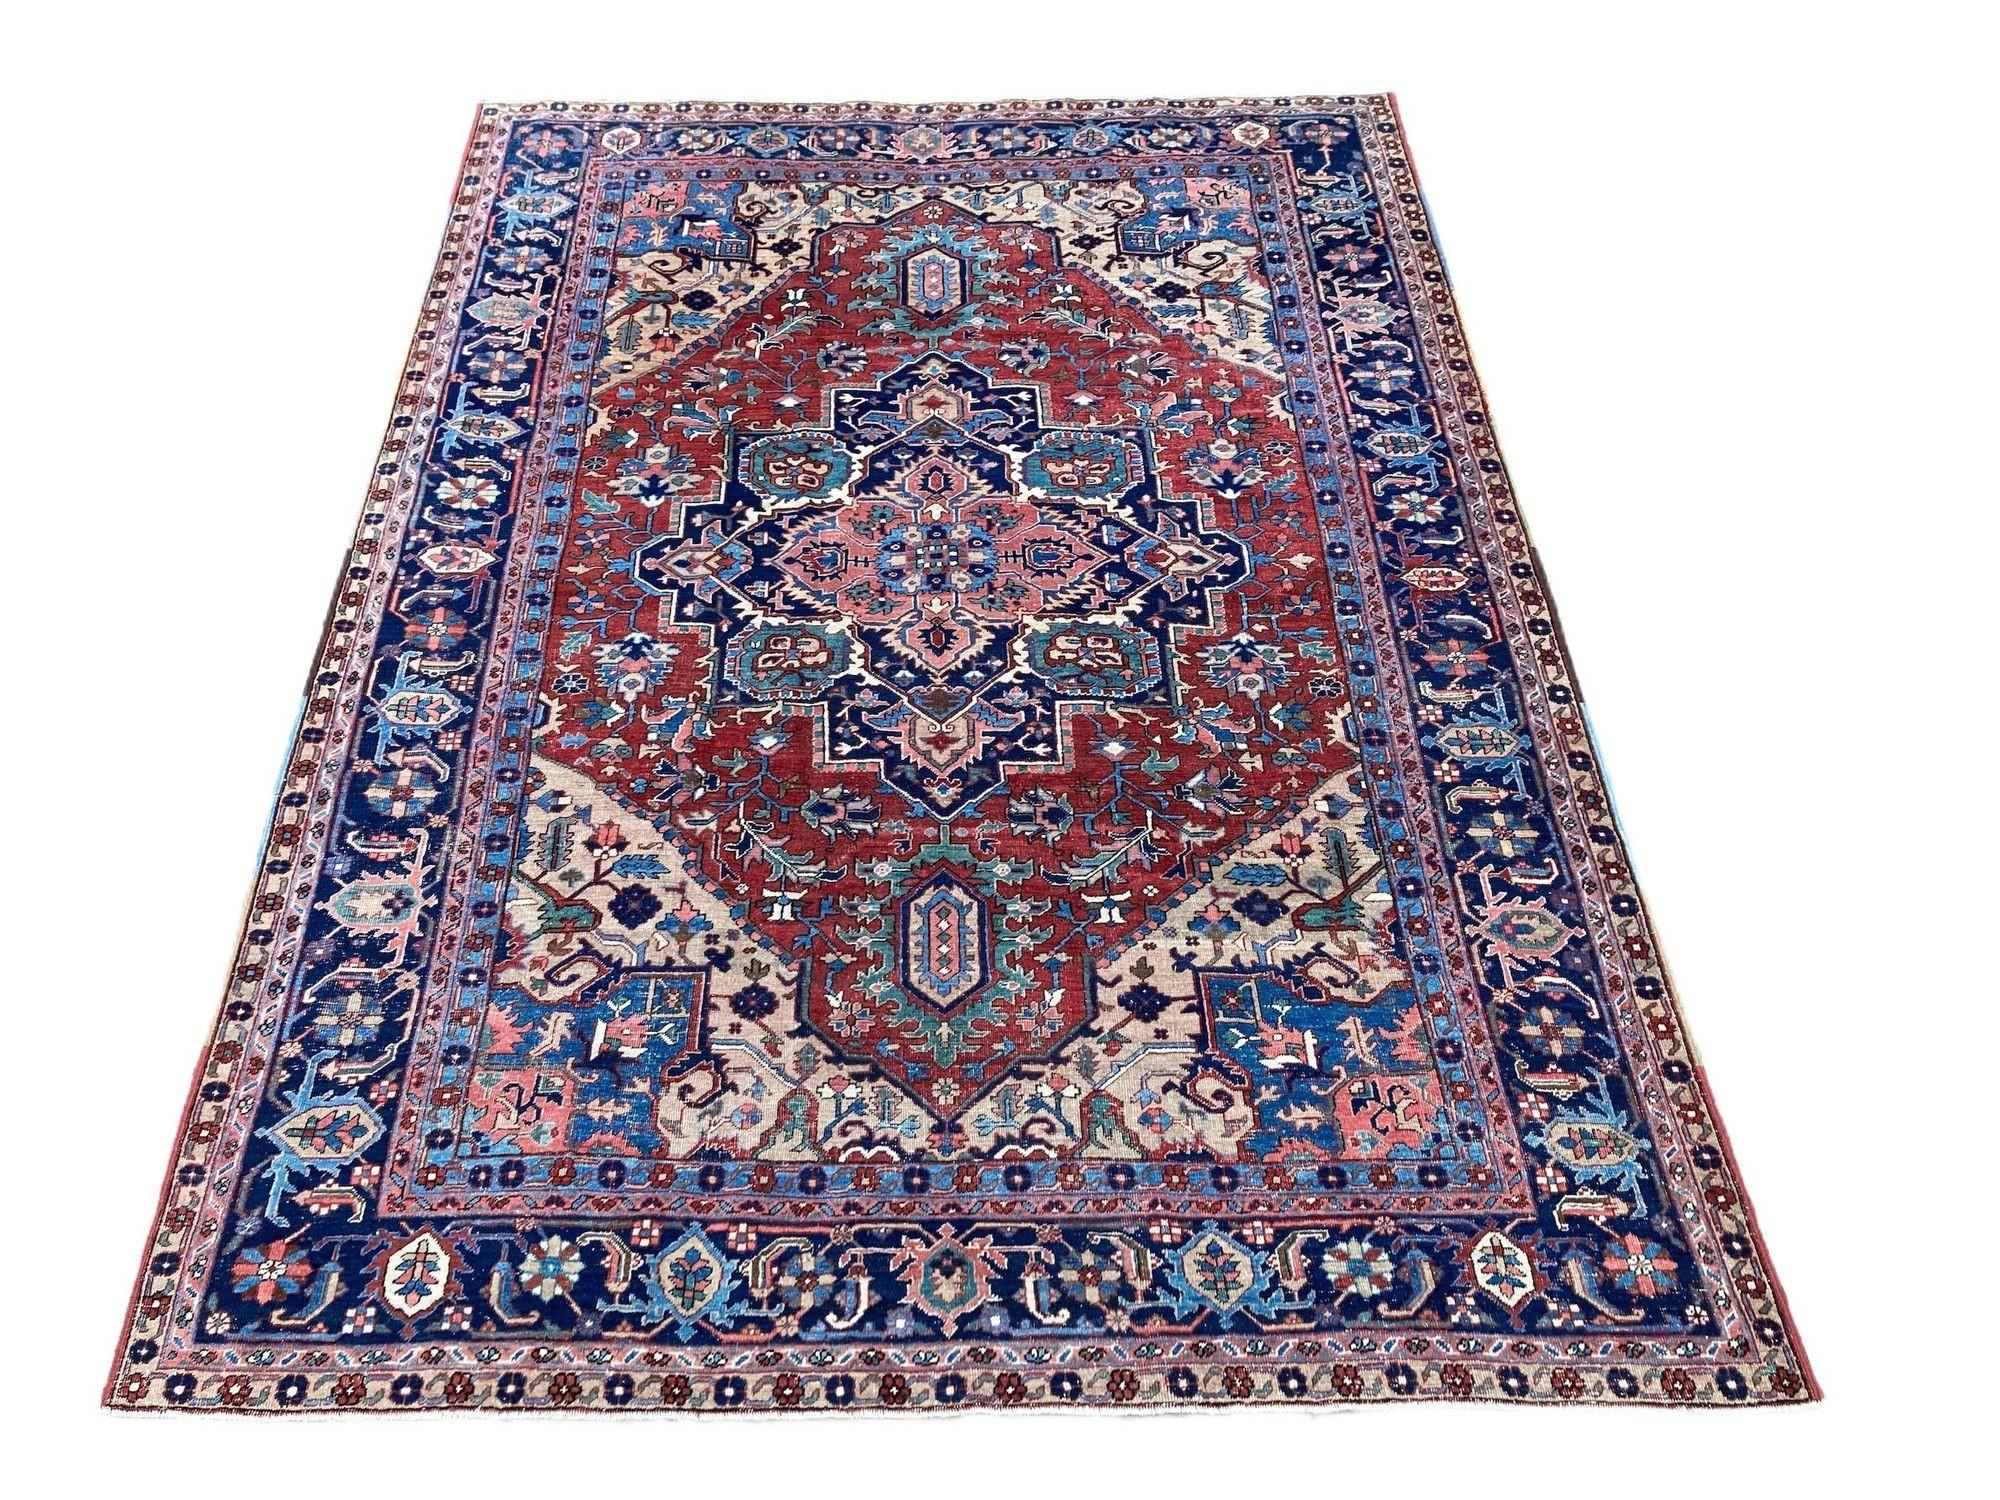 A fabulous antique Heriz carpet, hand woven circa 1900 with a large geometrical medallion on a terracotta field and deep indigo border. Fabulous secondary colours of blues, greens and salmon pink and a highly decorative piece. Size: 3.43m x 2.56m